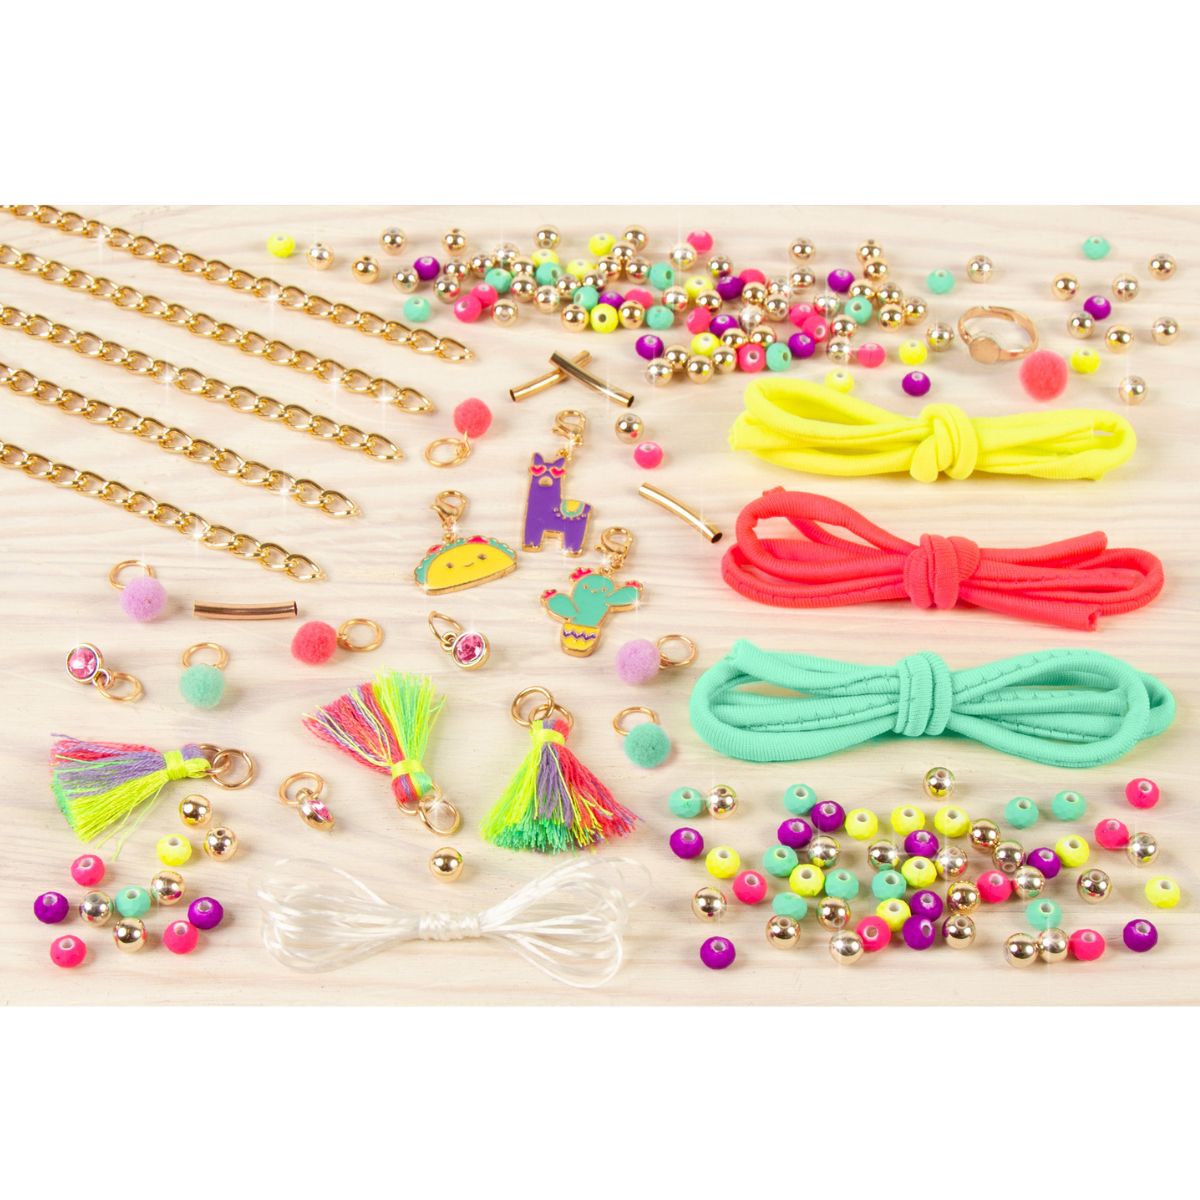 Neo Brite Chains &amp; Charms